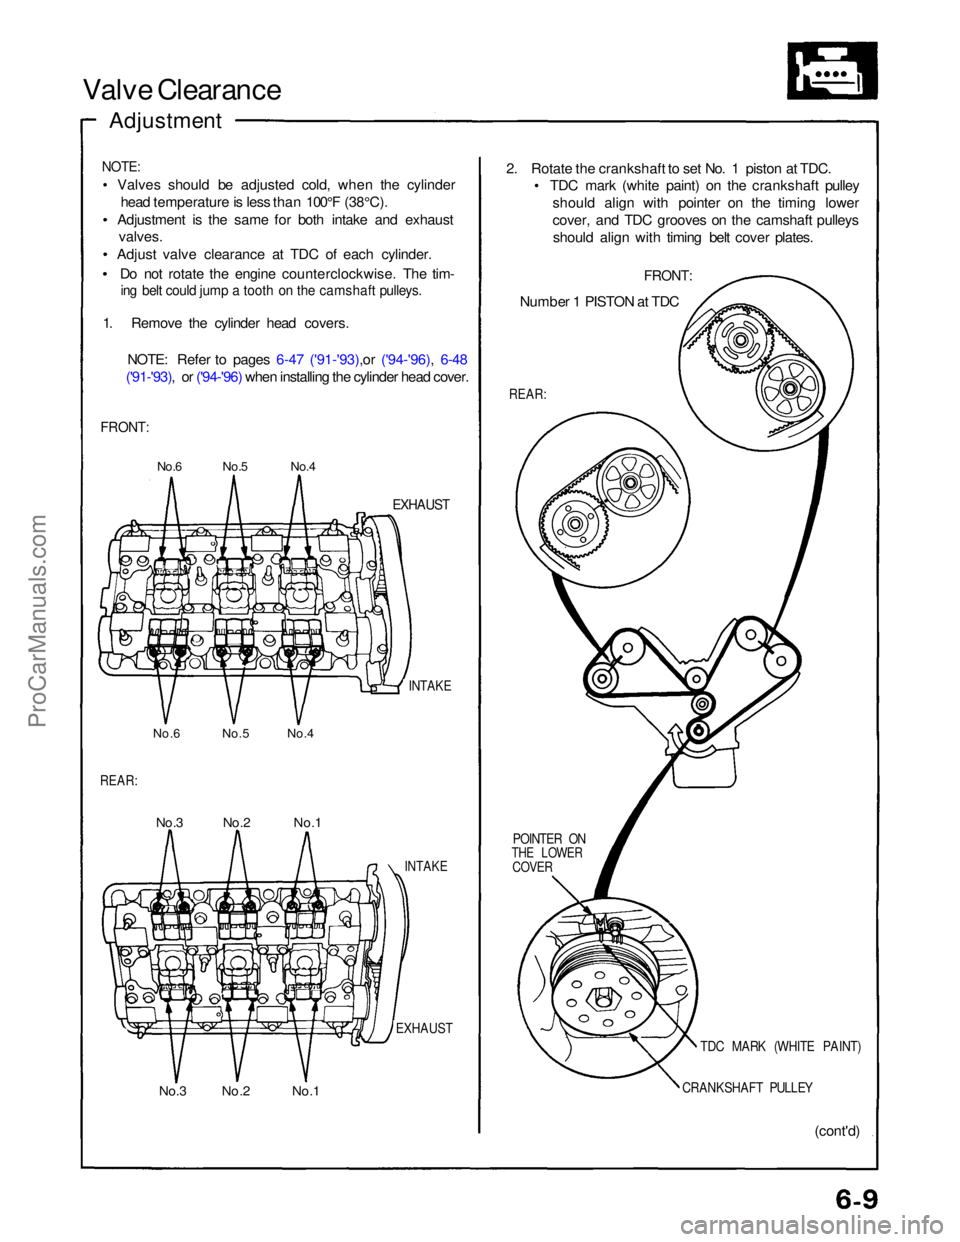 ACURA NSX 1991  Service Repair Manual 
Valve Clearance

Adjustment

NOTE:
 Valves should be adjusted cold, when the cylinderhead temperature is less than 100°F (38°C).
Adjustment is the same for both intake and exhaust valves.
Adjust va